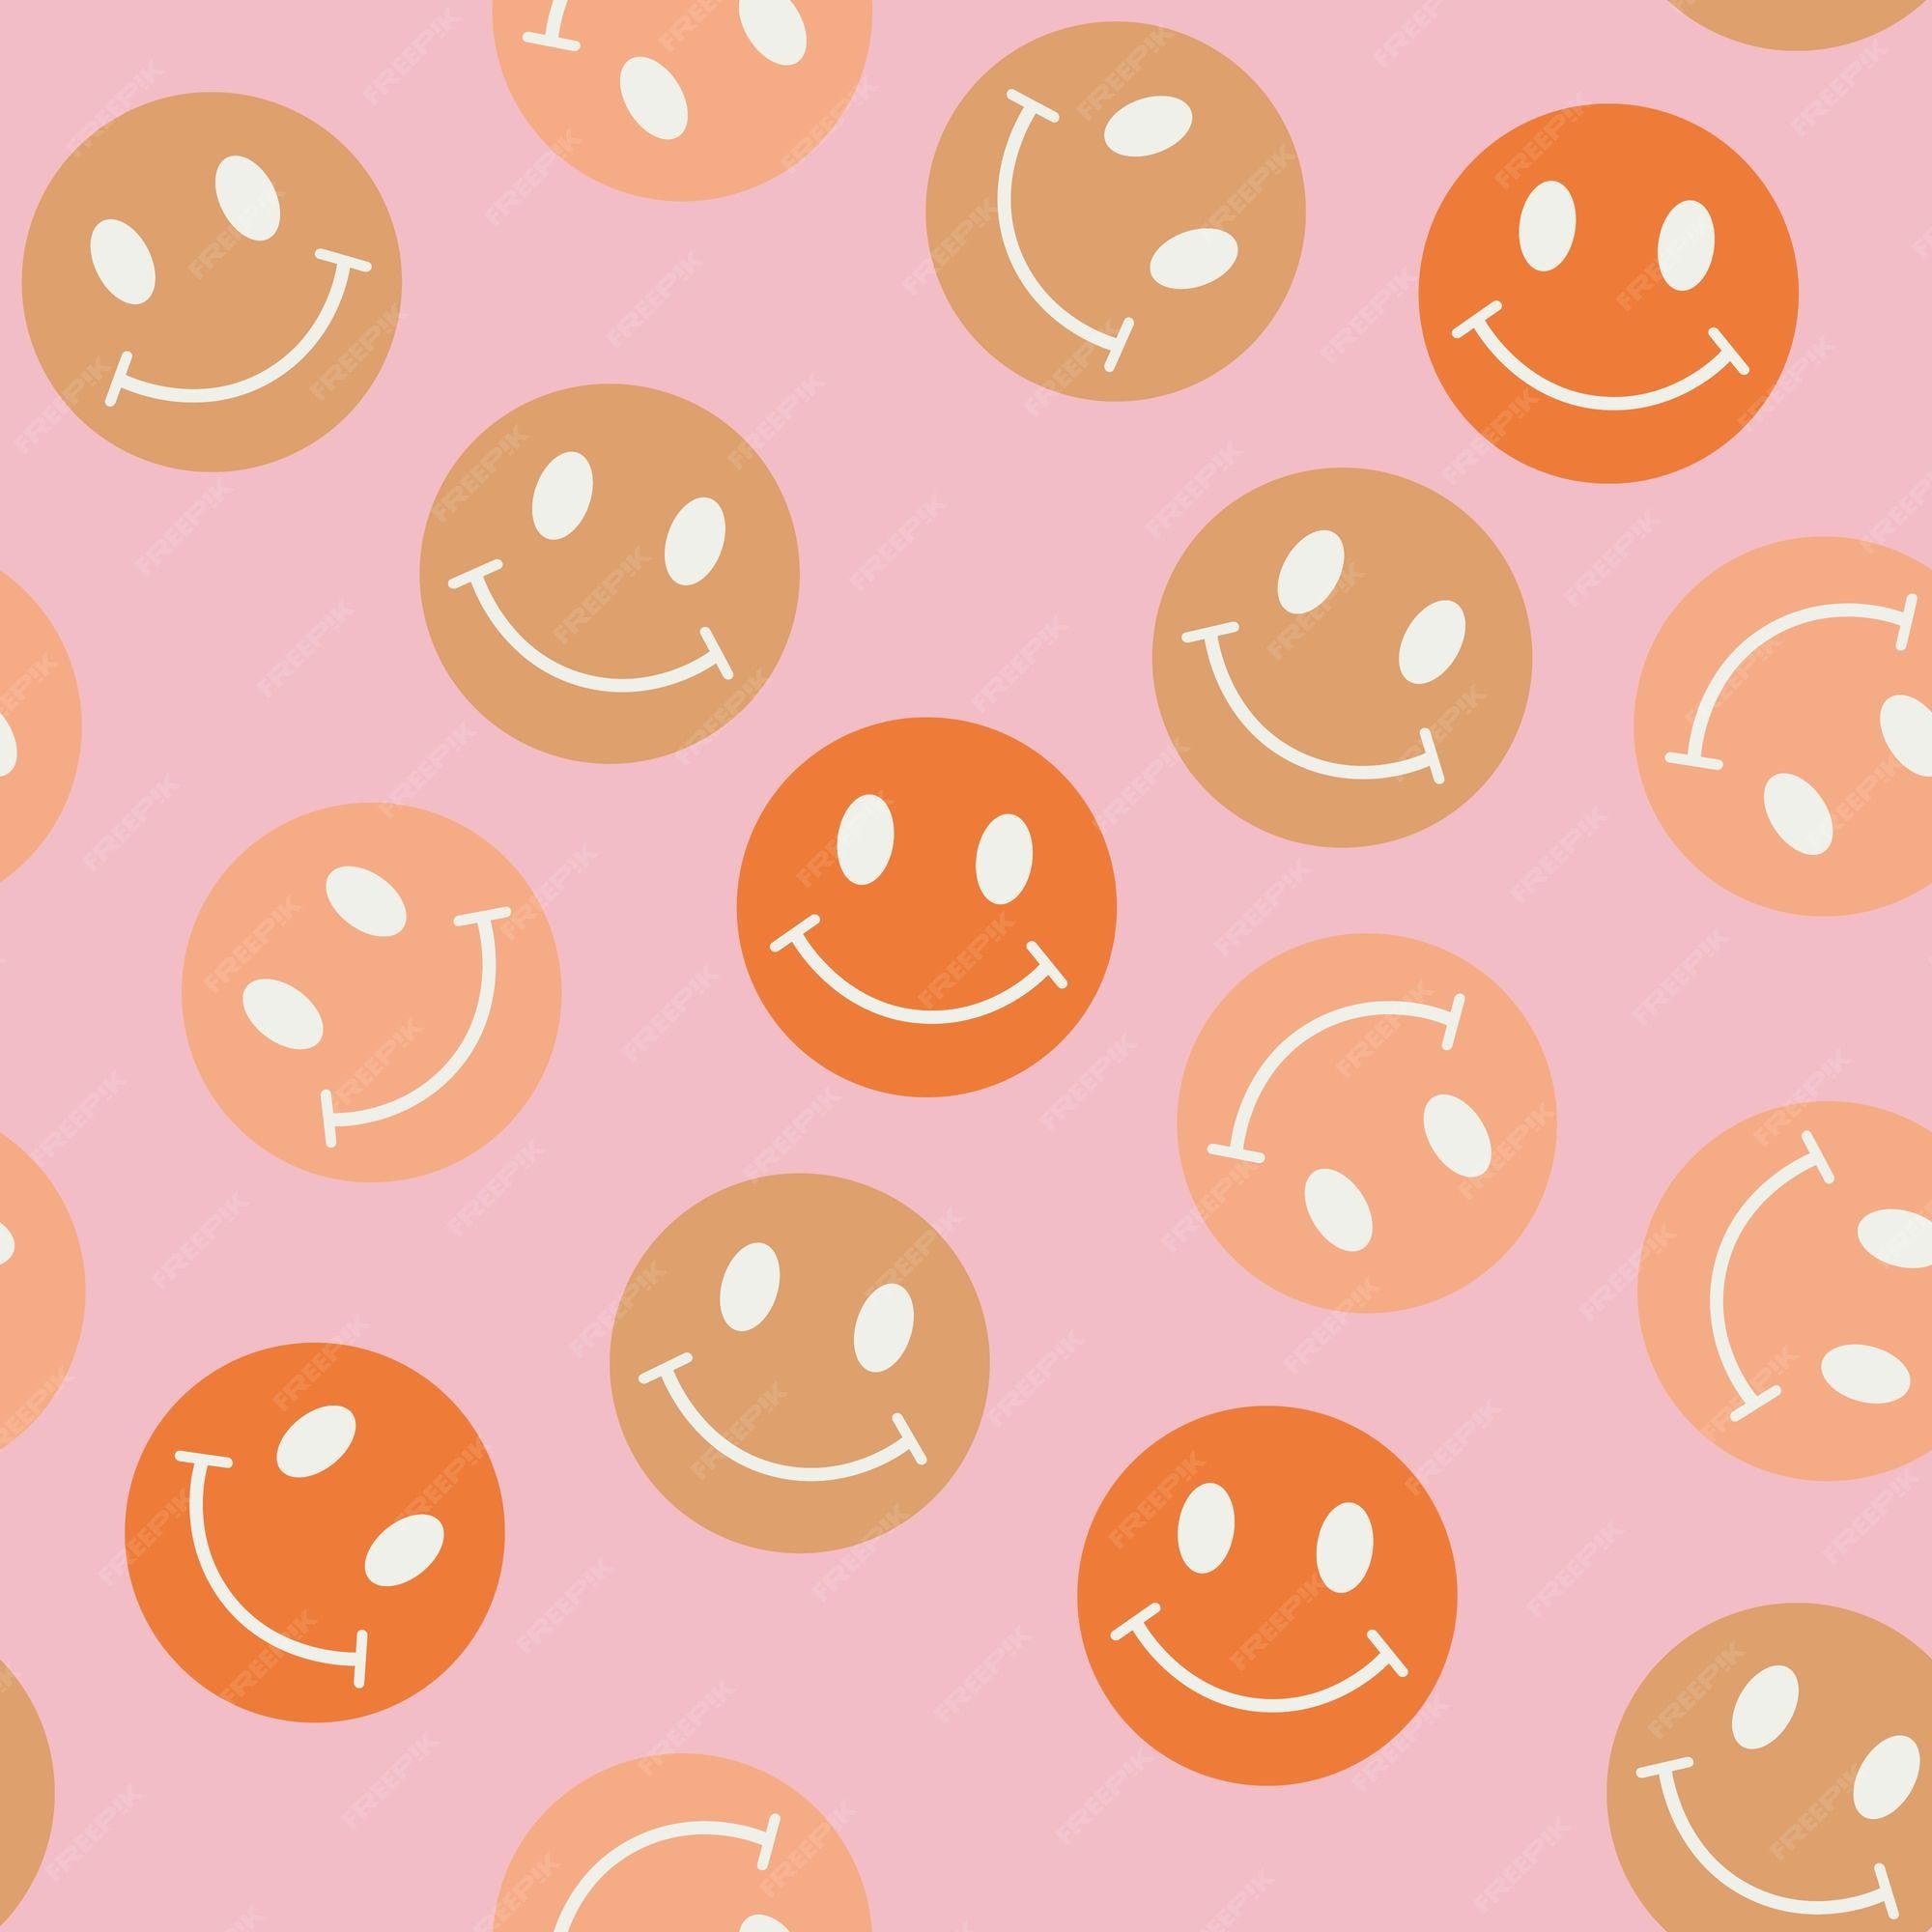 A pink background with a pattern of orange and pink smiley faces - Emoji